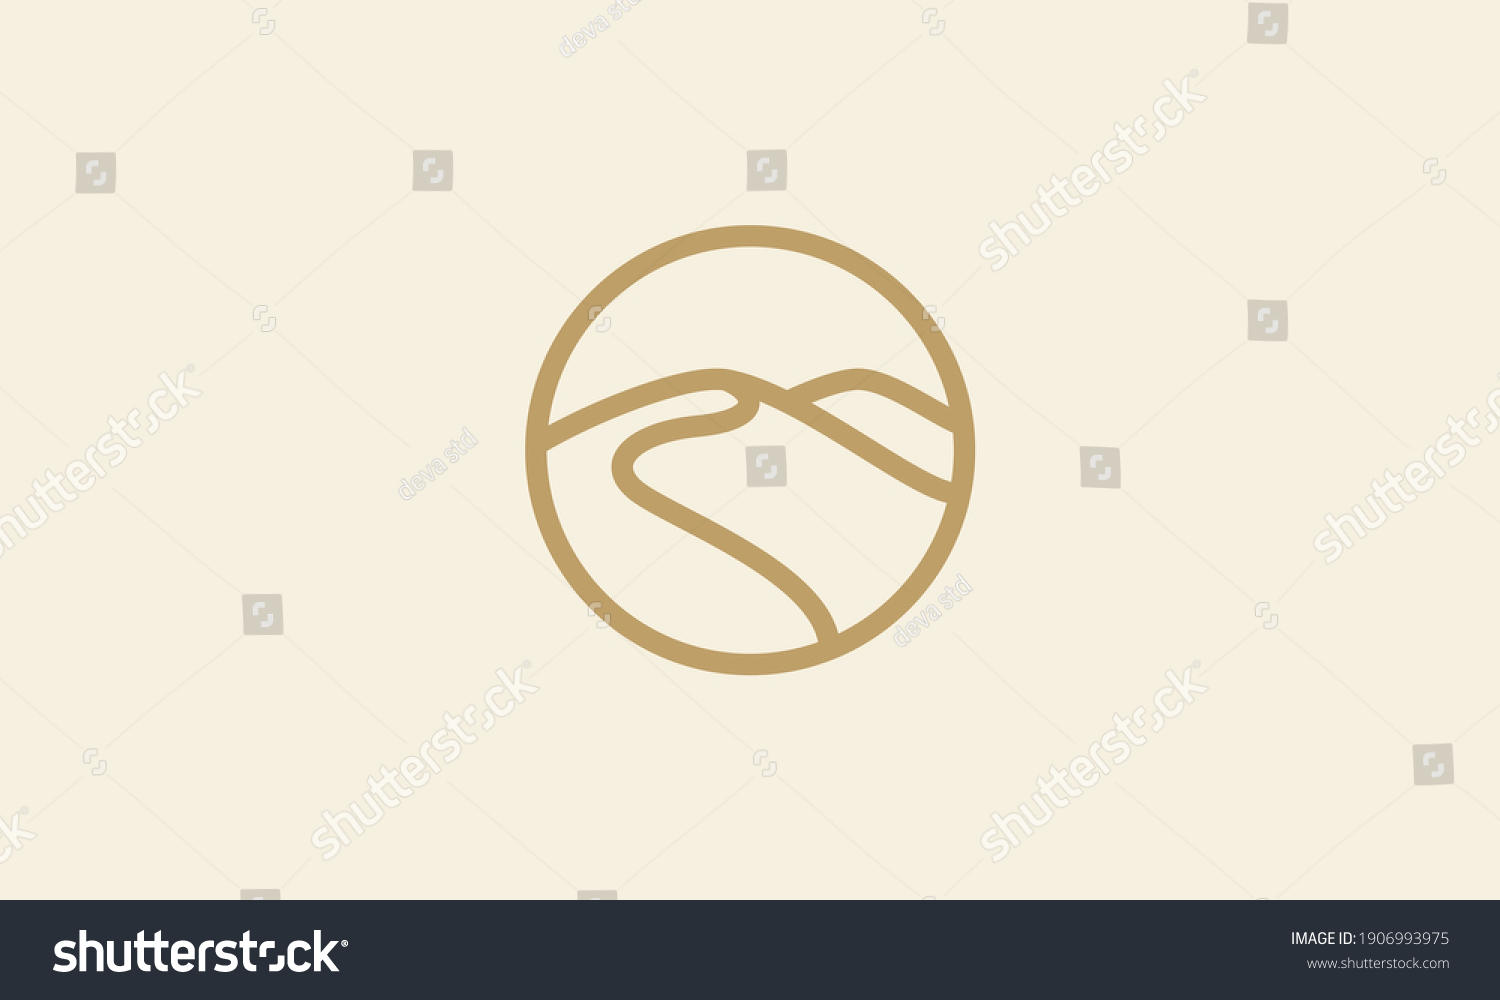 SVG of desert with sunset circle colorful logo symbol icon vector graphic design illustration svg